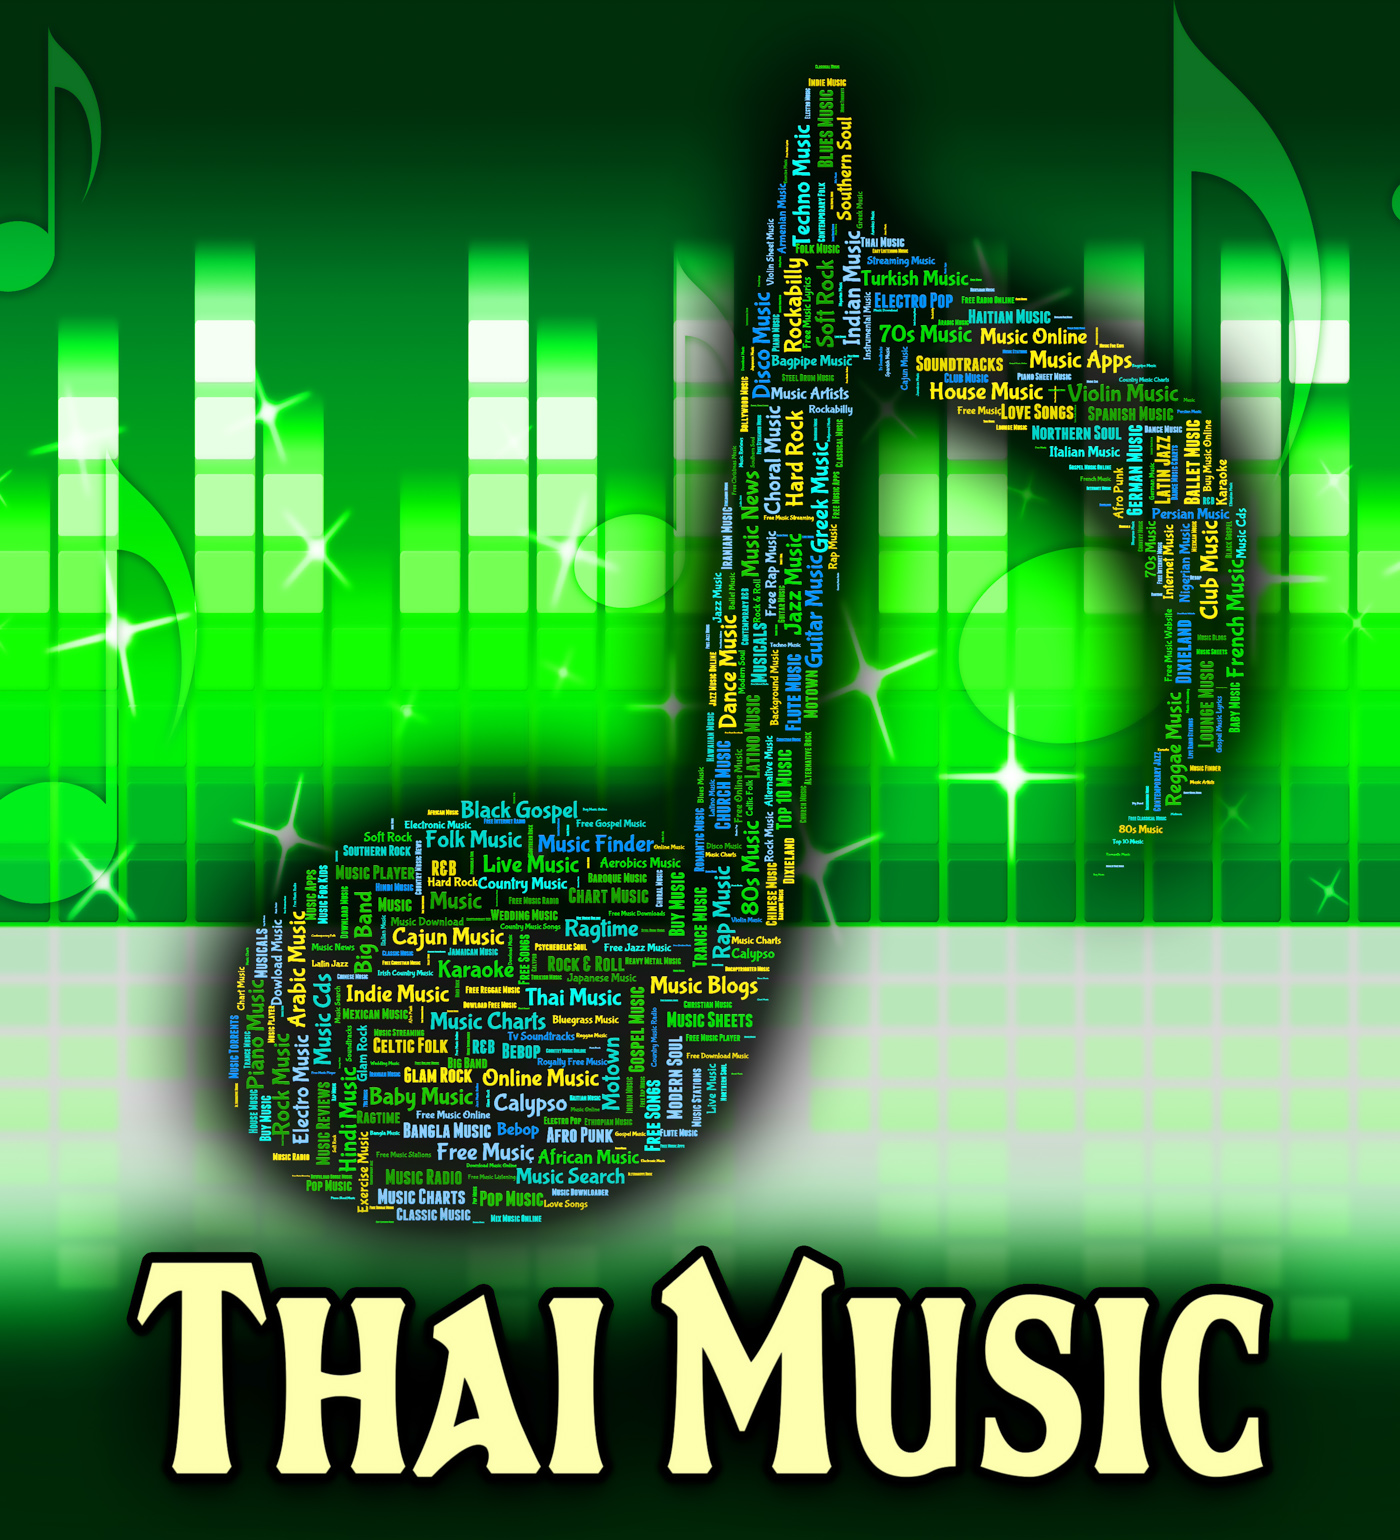 Thai music shows sound tracks and asian photo